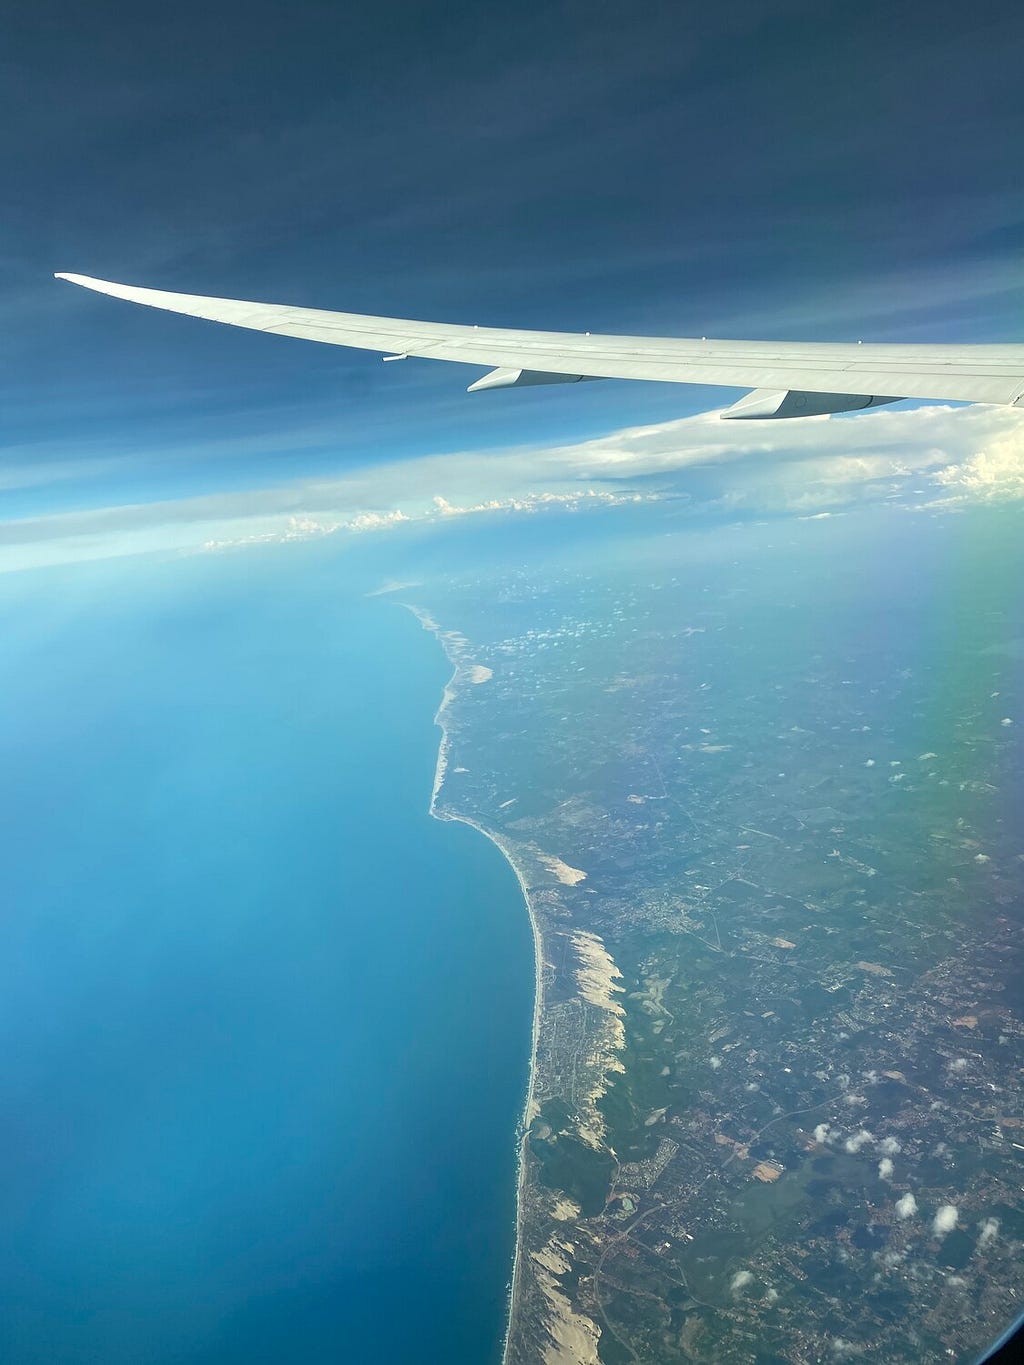 An image from an airplane over South America